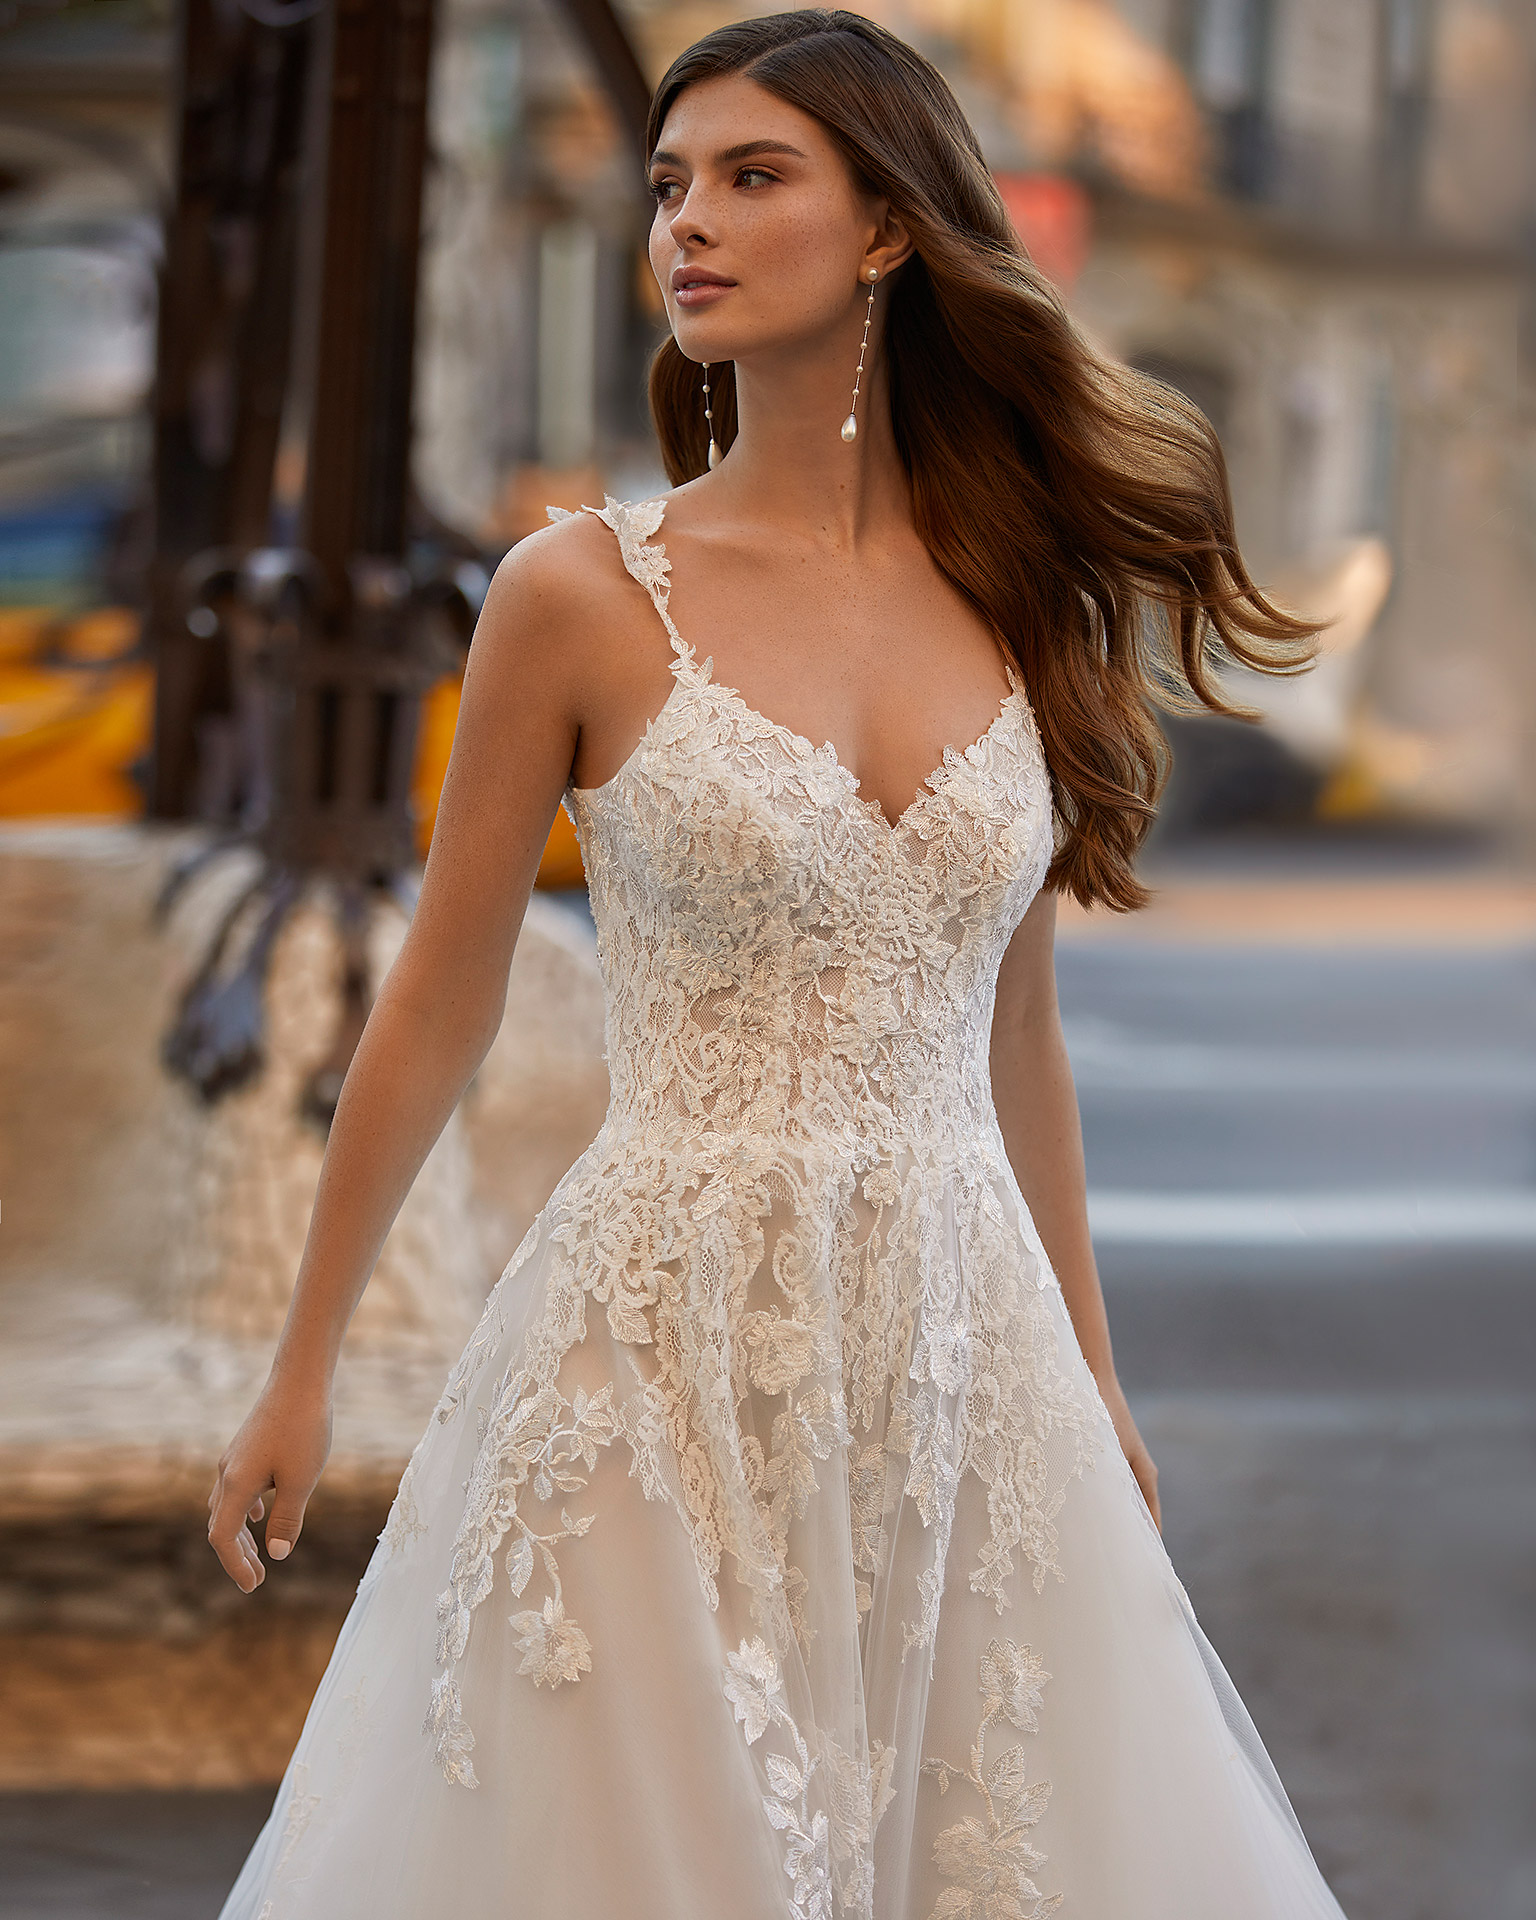 Princess-style A-line wedding dress, made of tulle with lace appliqués; with a V-neckline and back with crossed shoulder straps and floral lace detail. Dreamy Luna Novias design made of tulle with beadwork lace appliqués. LUNA_NOVIAS.